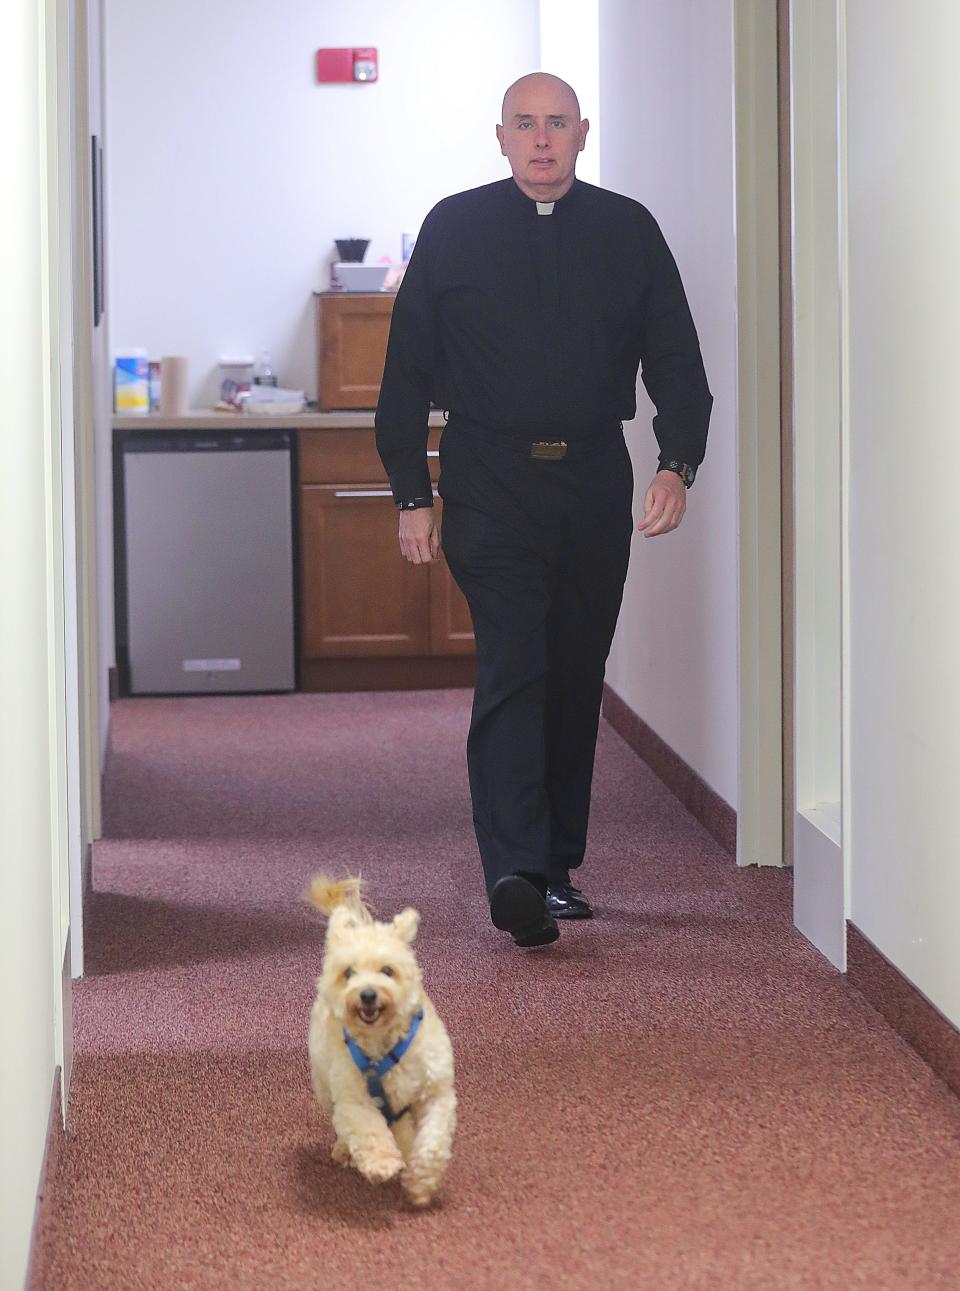 The Rev. Christopher Fronk walks with his dog Shipmate at Walsh Jesuit High School on Thursday. Fronk will become the new president of the Catholic high school at the start of July.